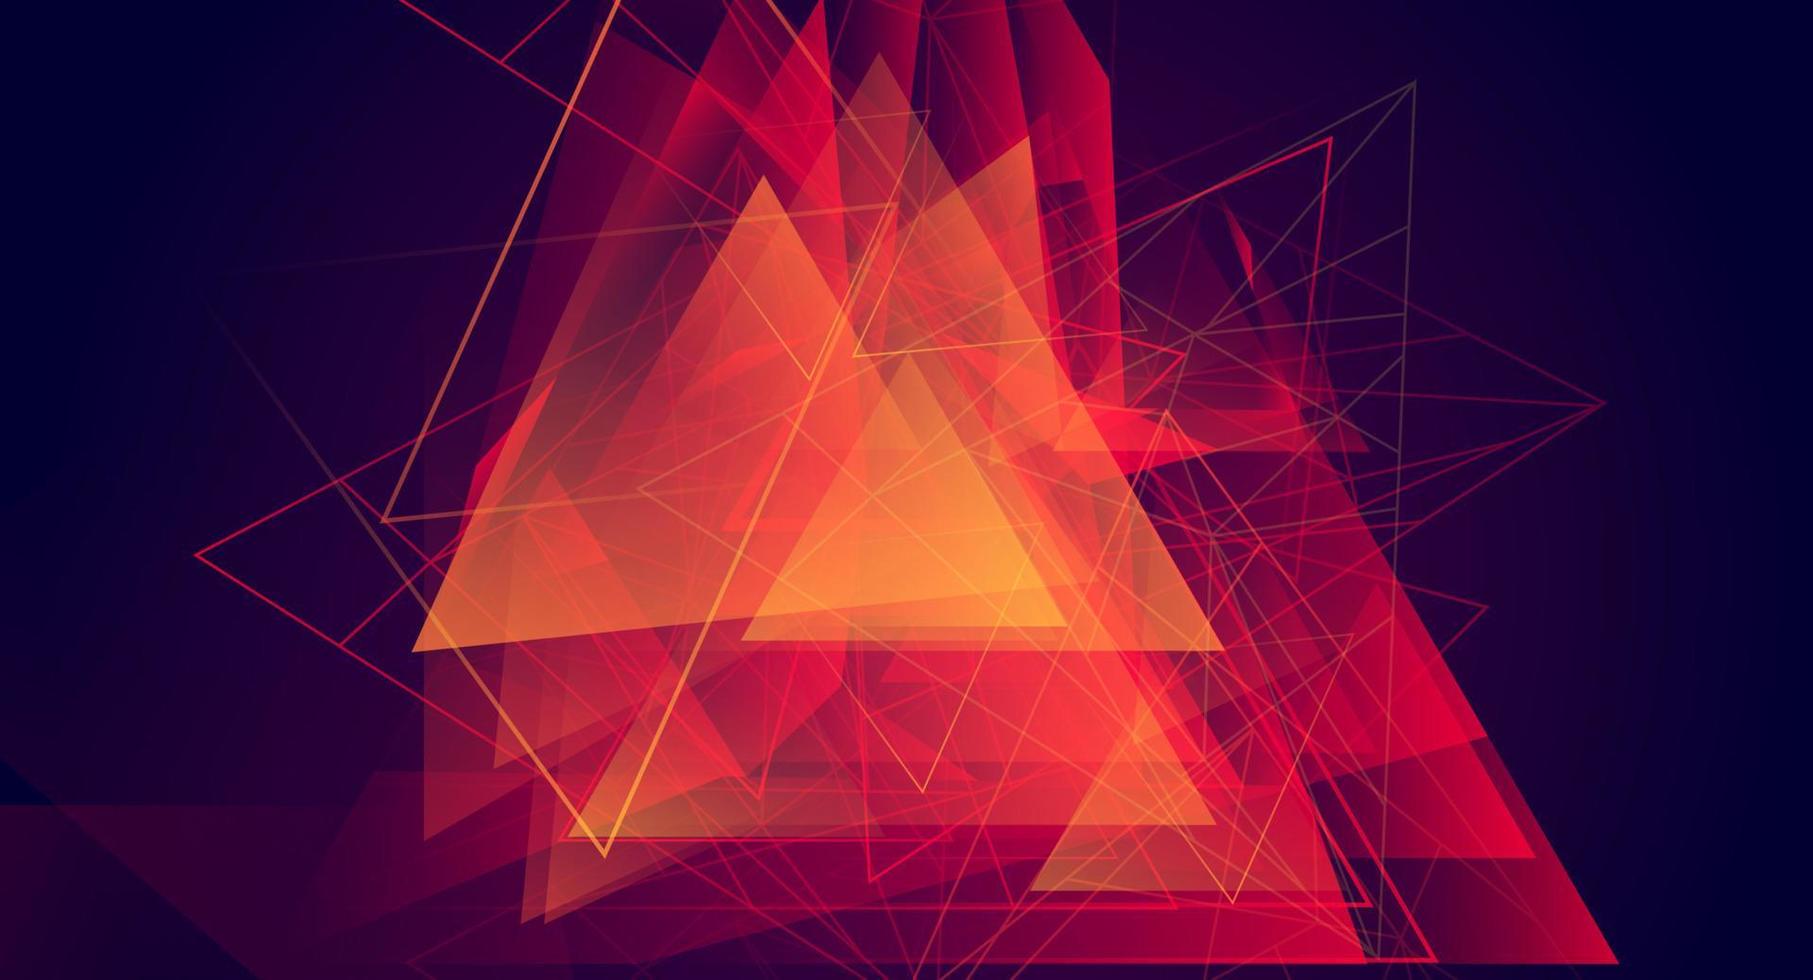 Abstract fractal geometric triangle shape background design. Vector illustration